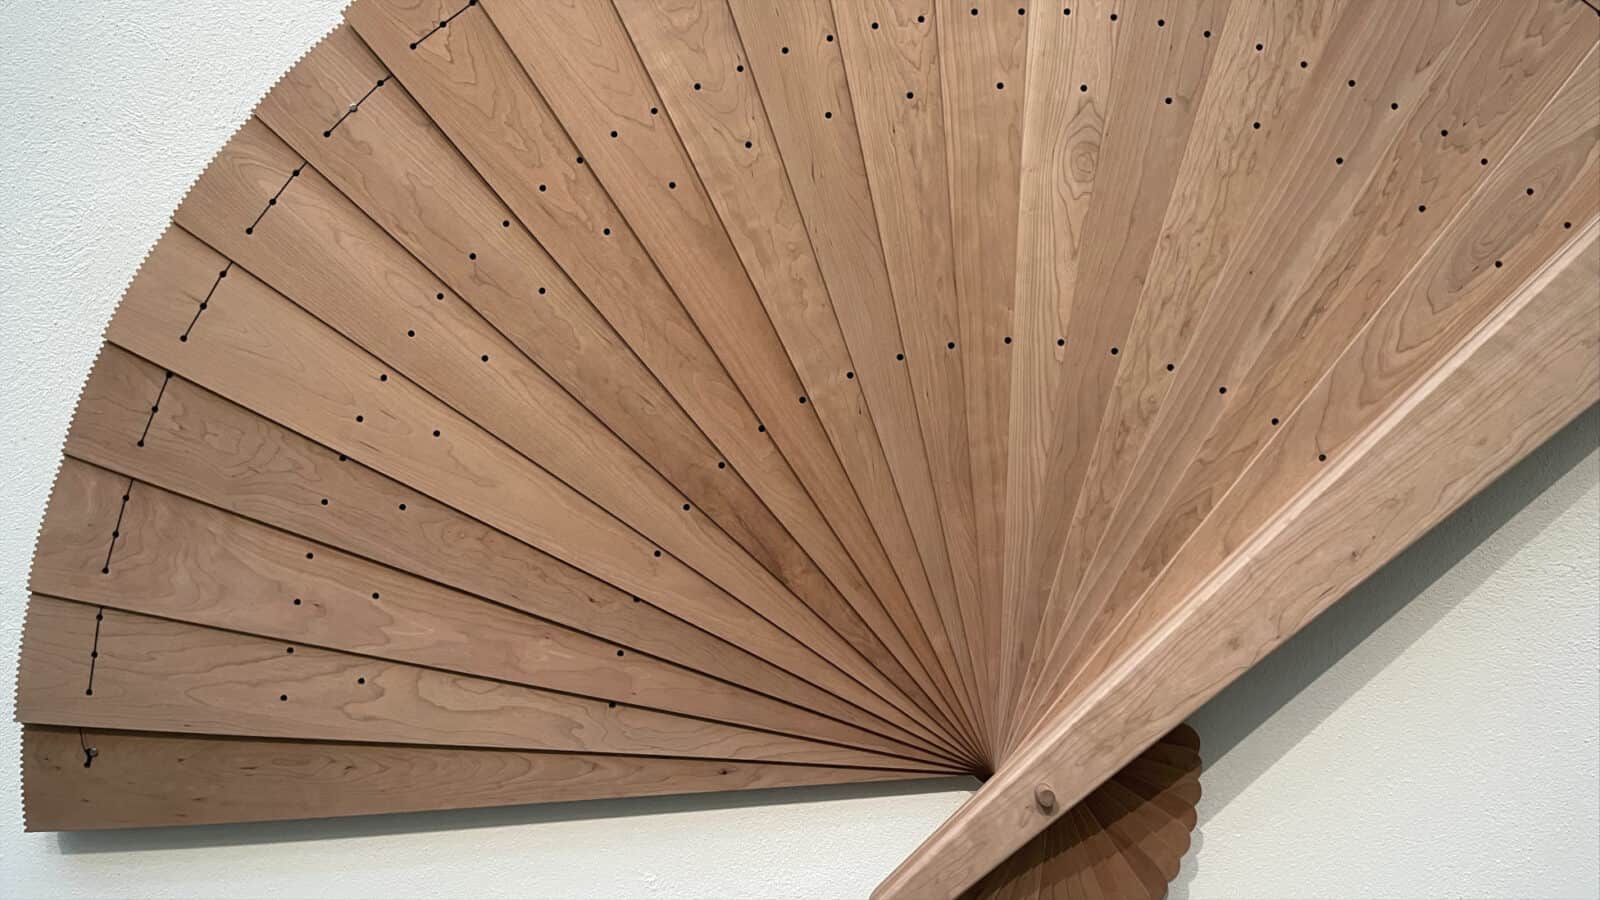 Elizabeth Atterbury recalls her grandmother's fan in an arc of cherry wood as tall a woman, at the Clark Art Institute.